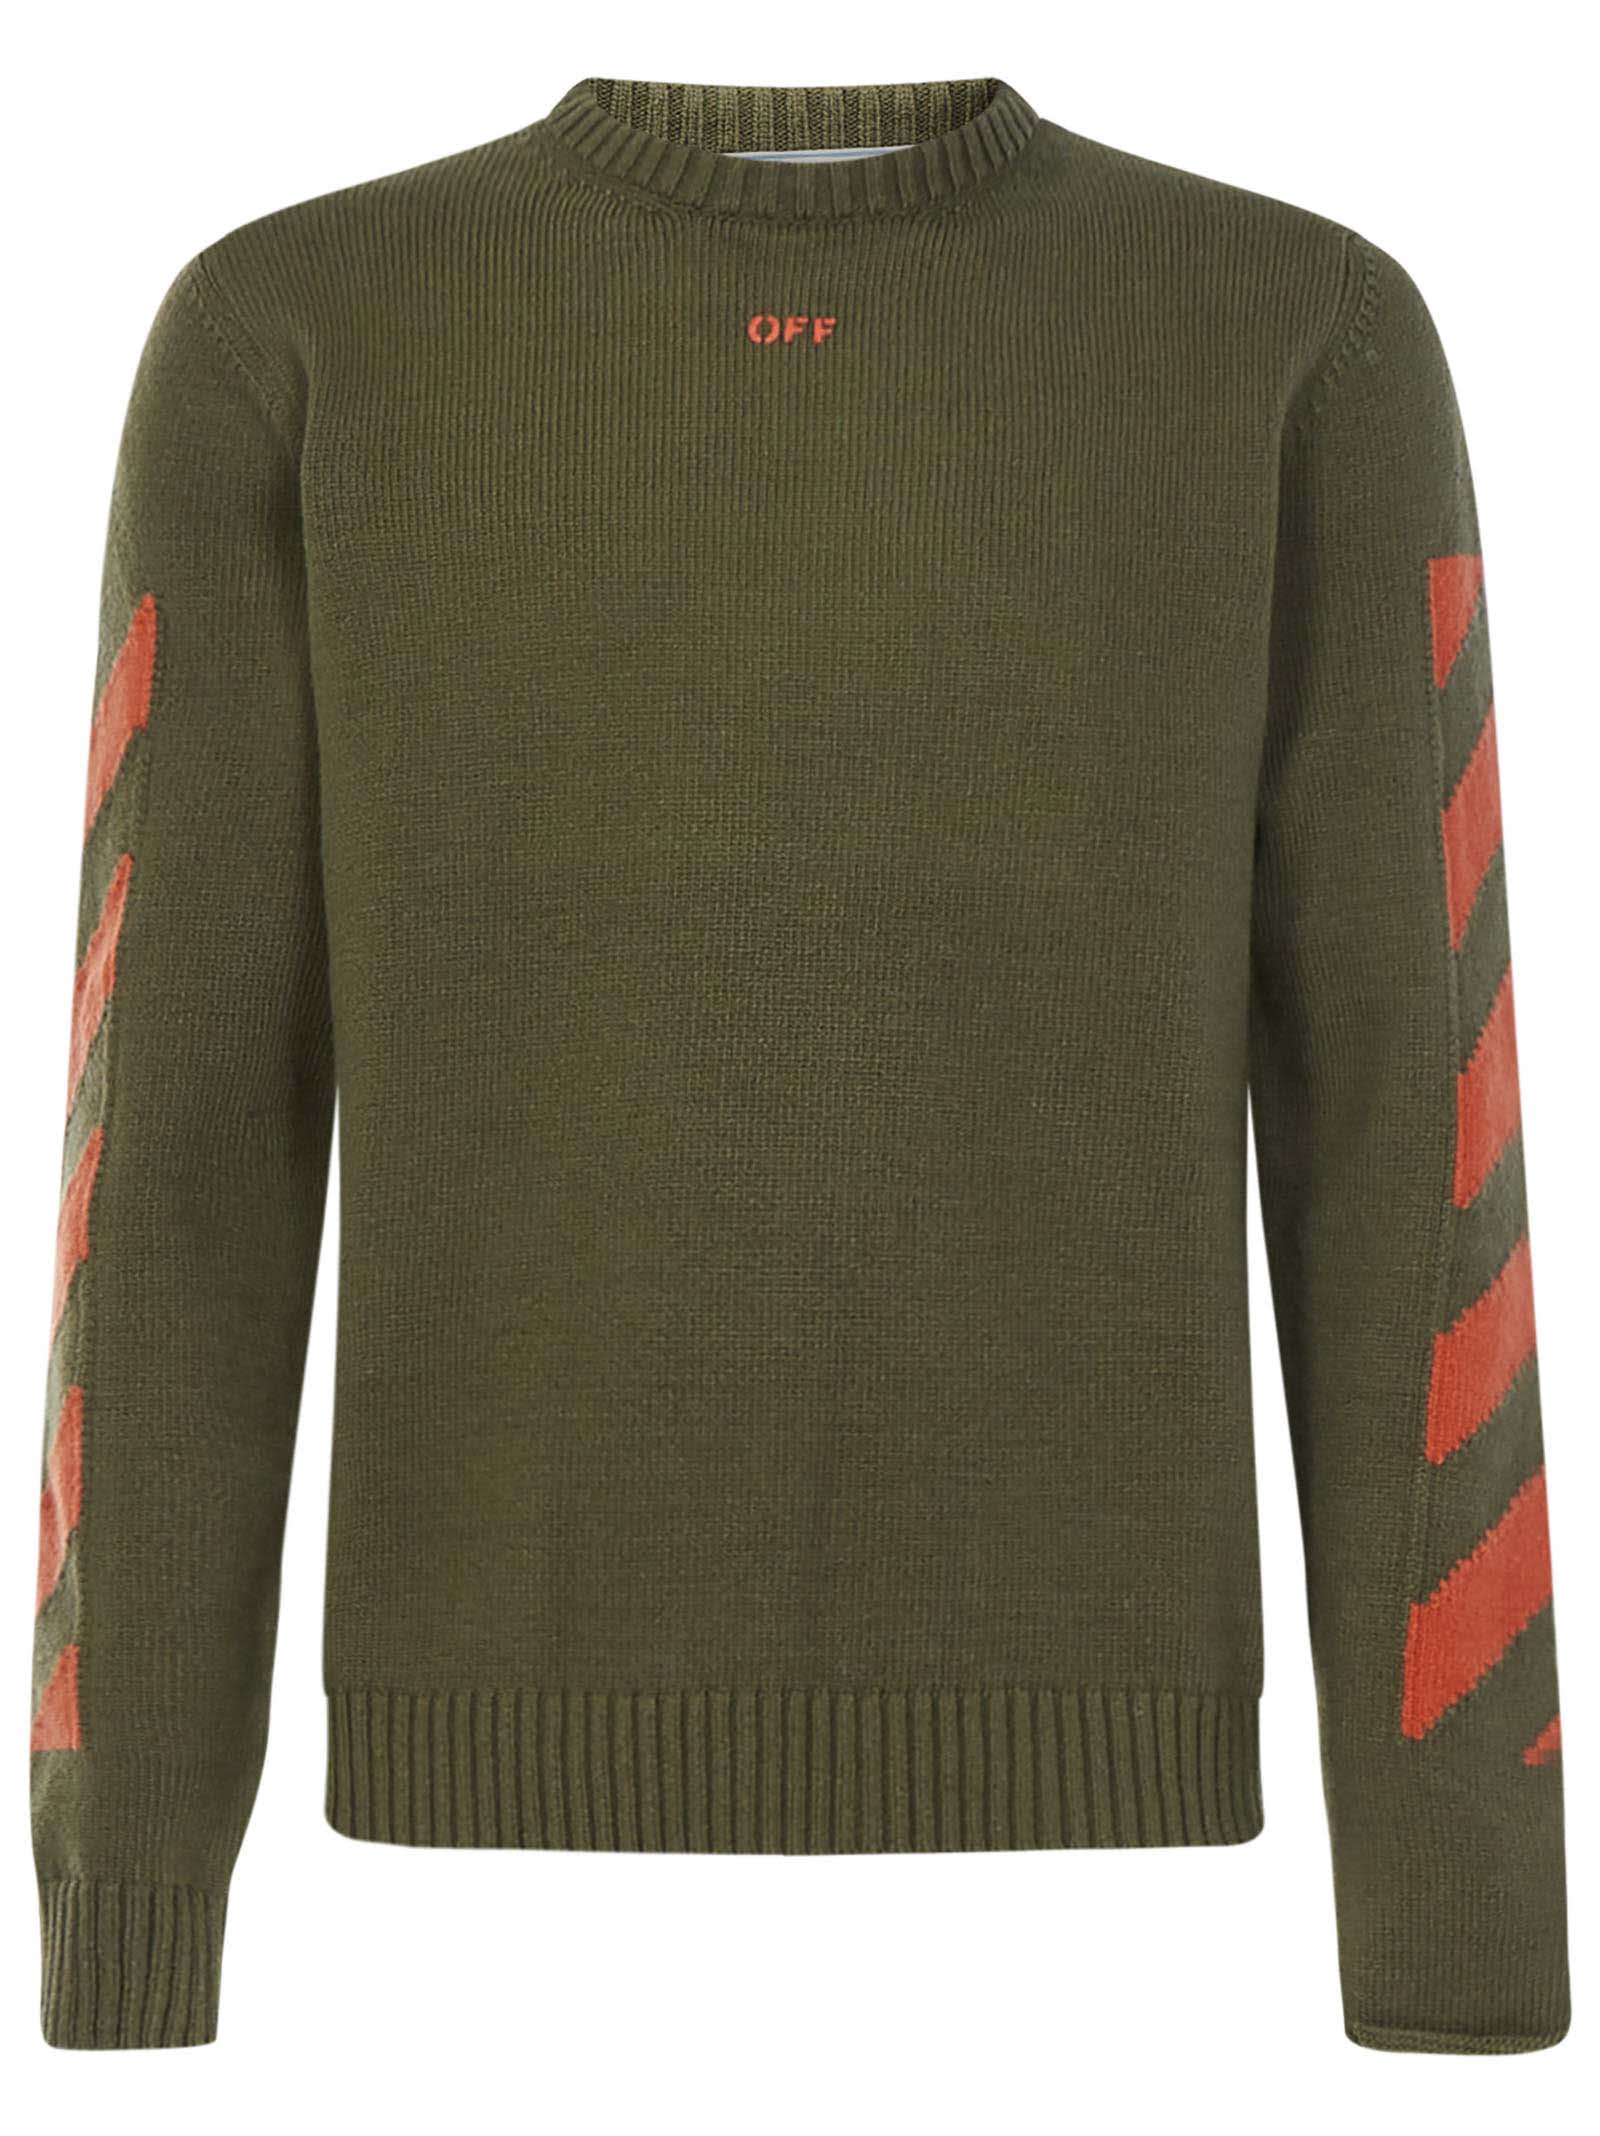 Off-White Diag Knit Sweater